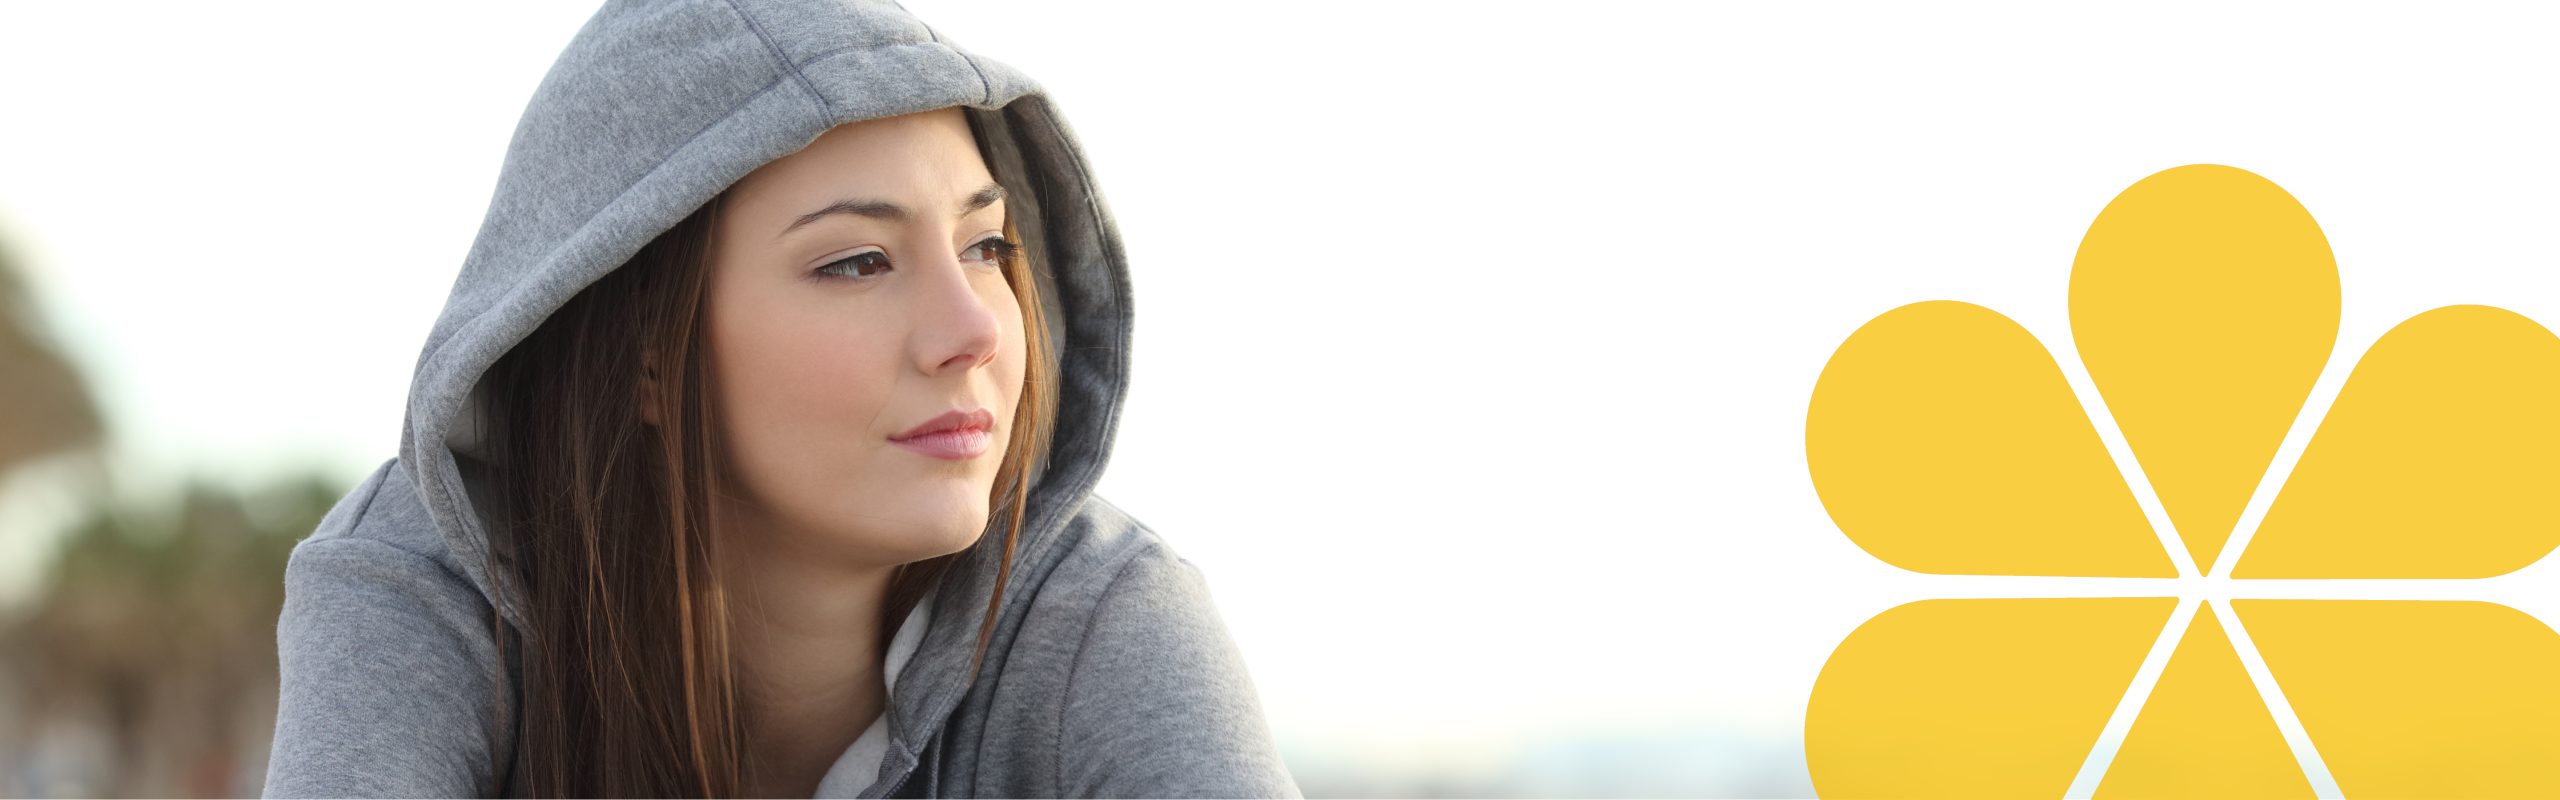 Girl with a hoody on looking into the distance. She looks like she is thinking.